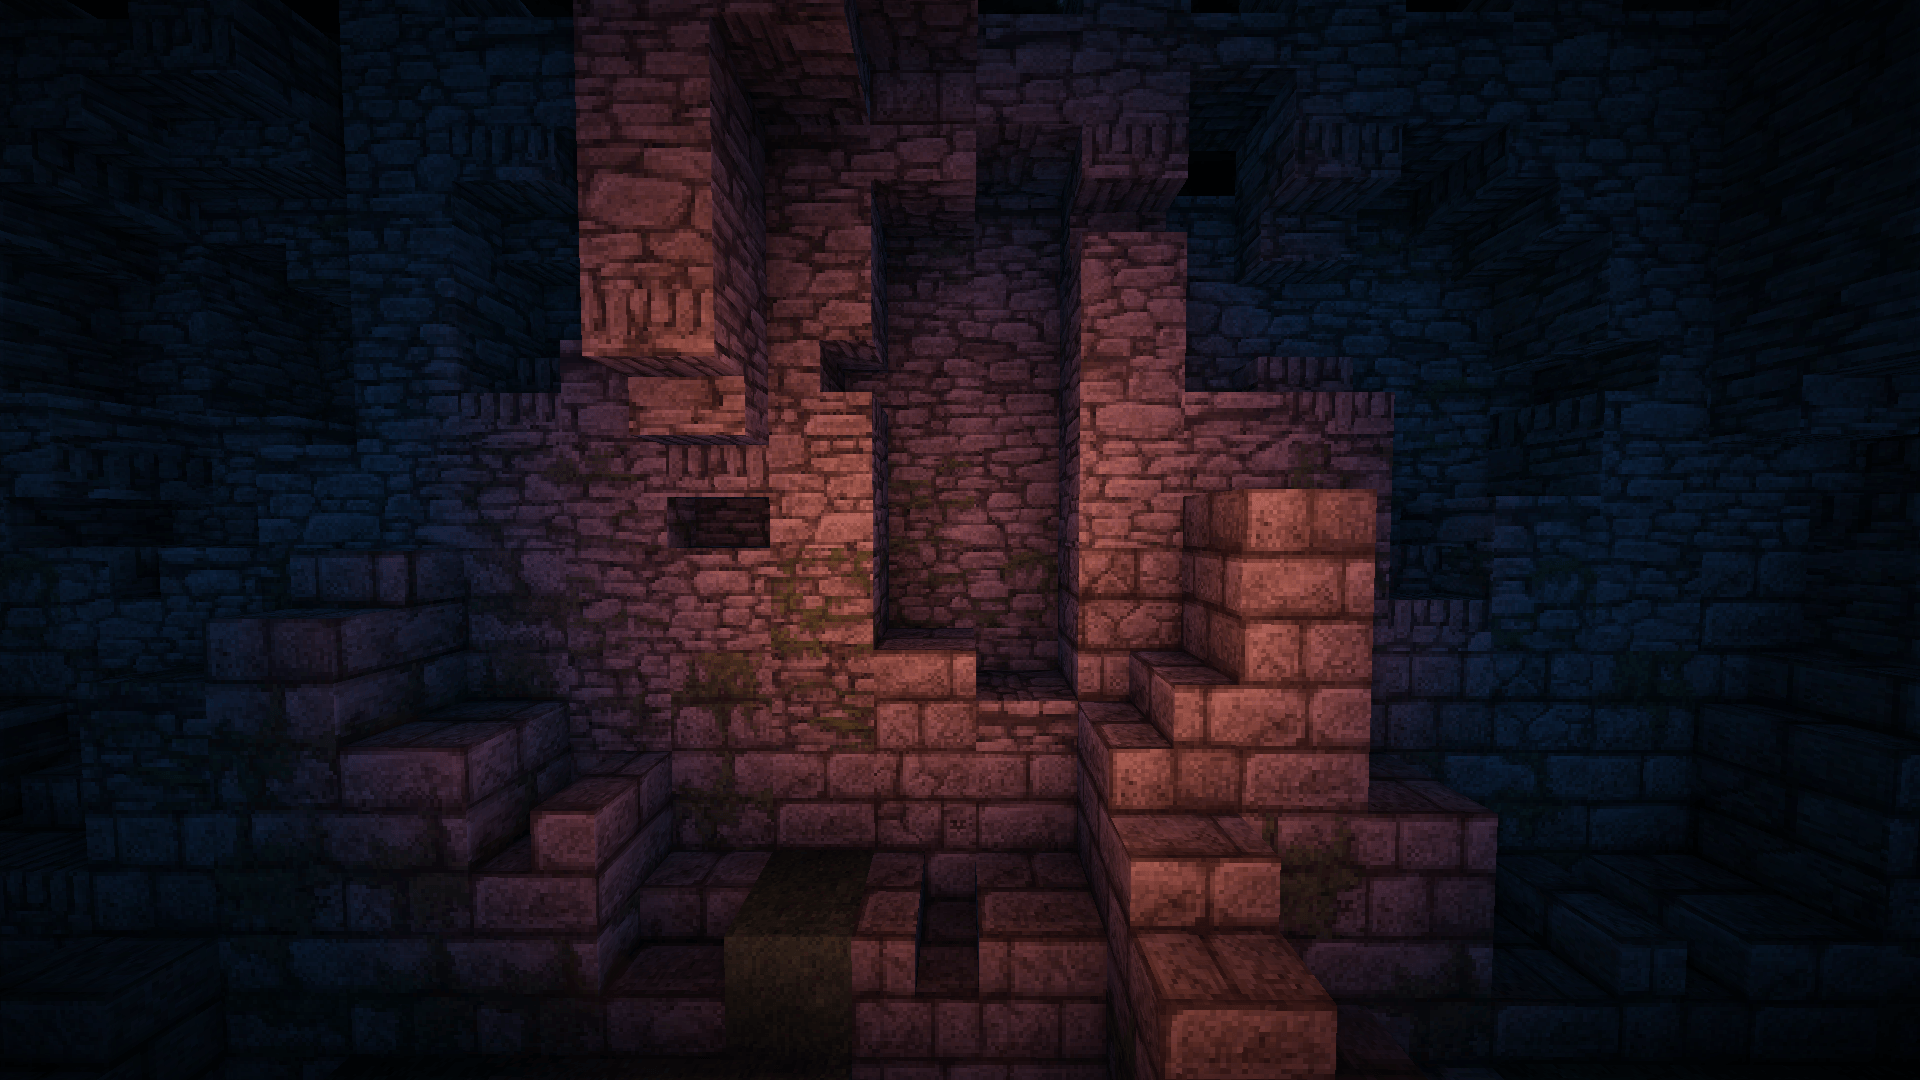 minecraft_wall_close_up_at_night_with_shaders__by_husseinhorack-d8gxep5